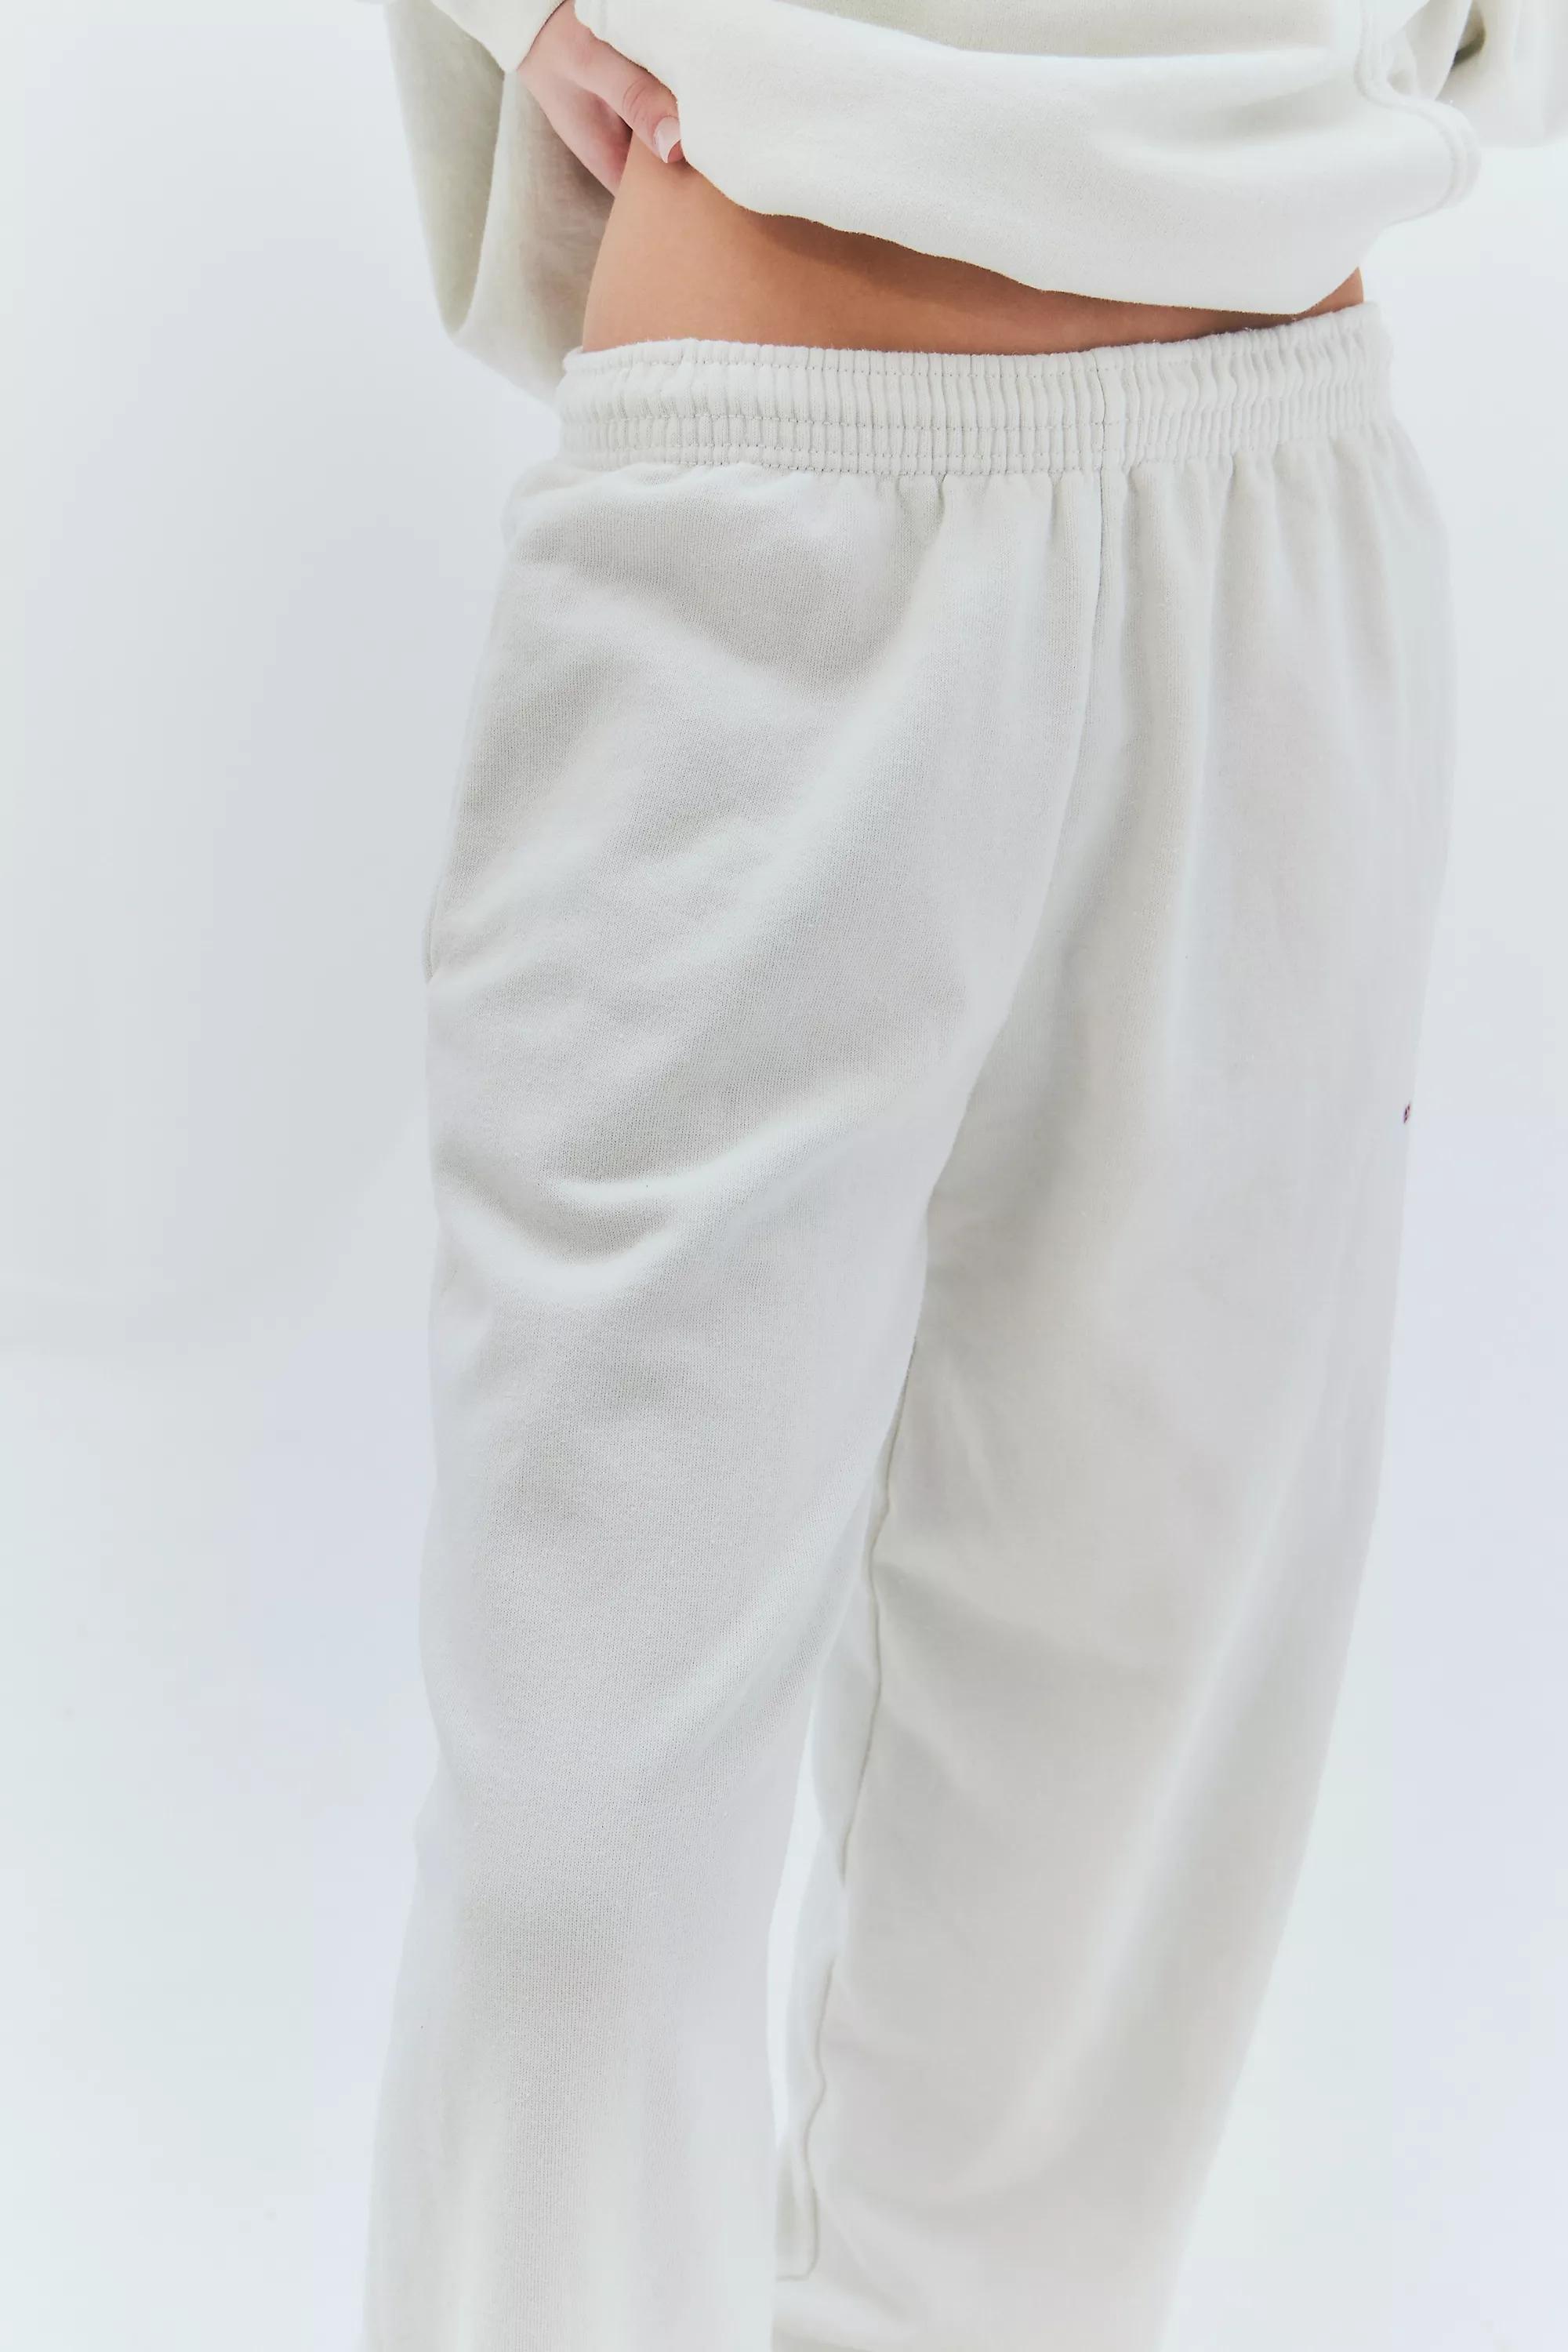 Urban Outfitters - Cream Iets Frans... Putty Cuffed Joggers